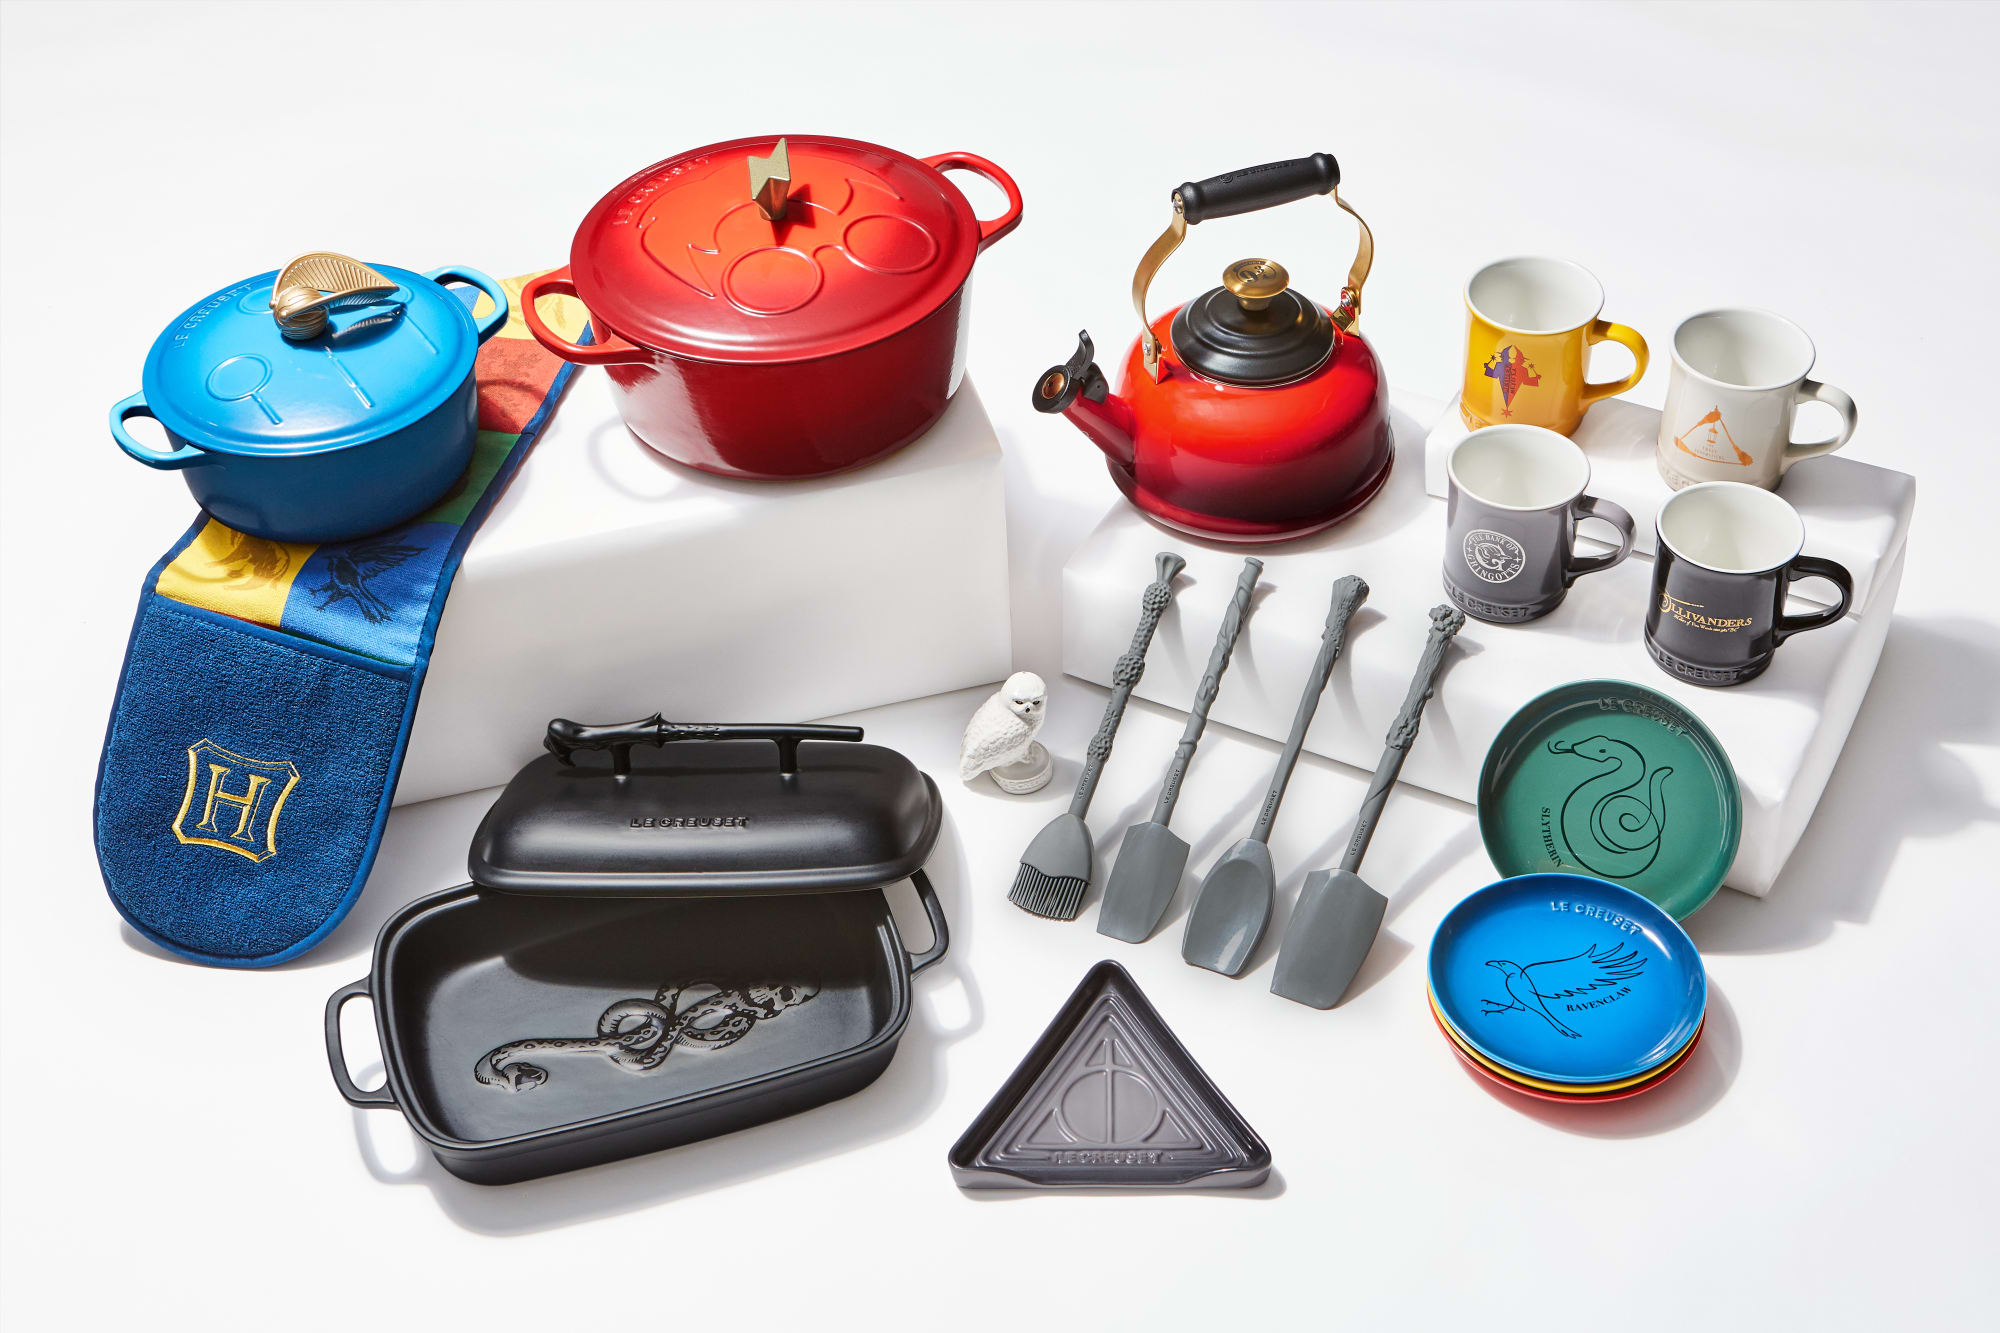 Le Creuset Harry Potter Collection inspires magical cooking